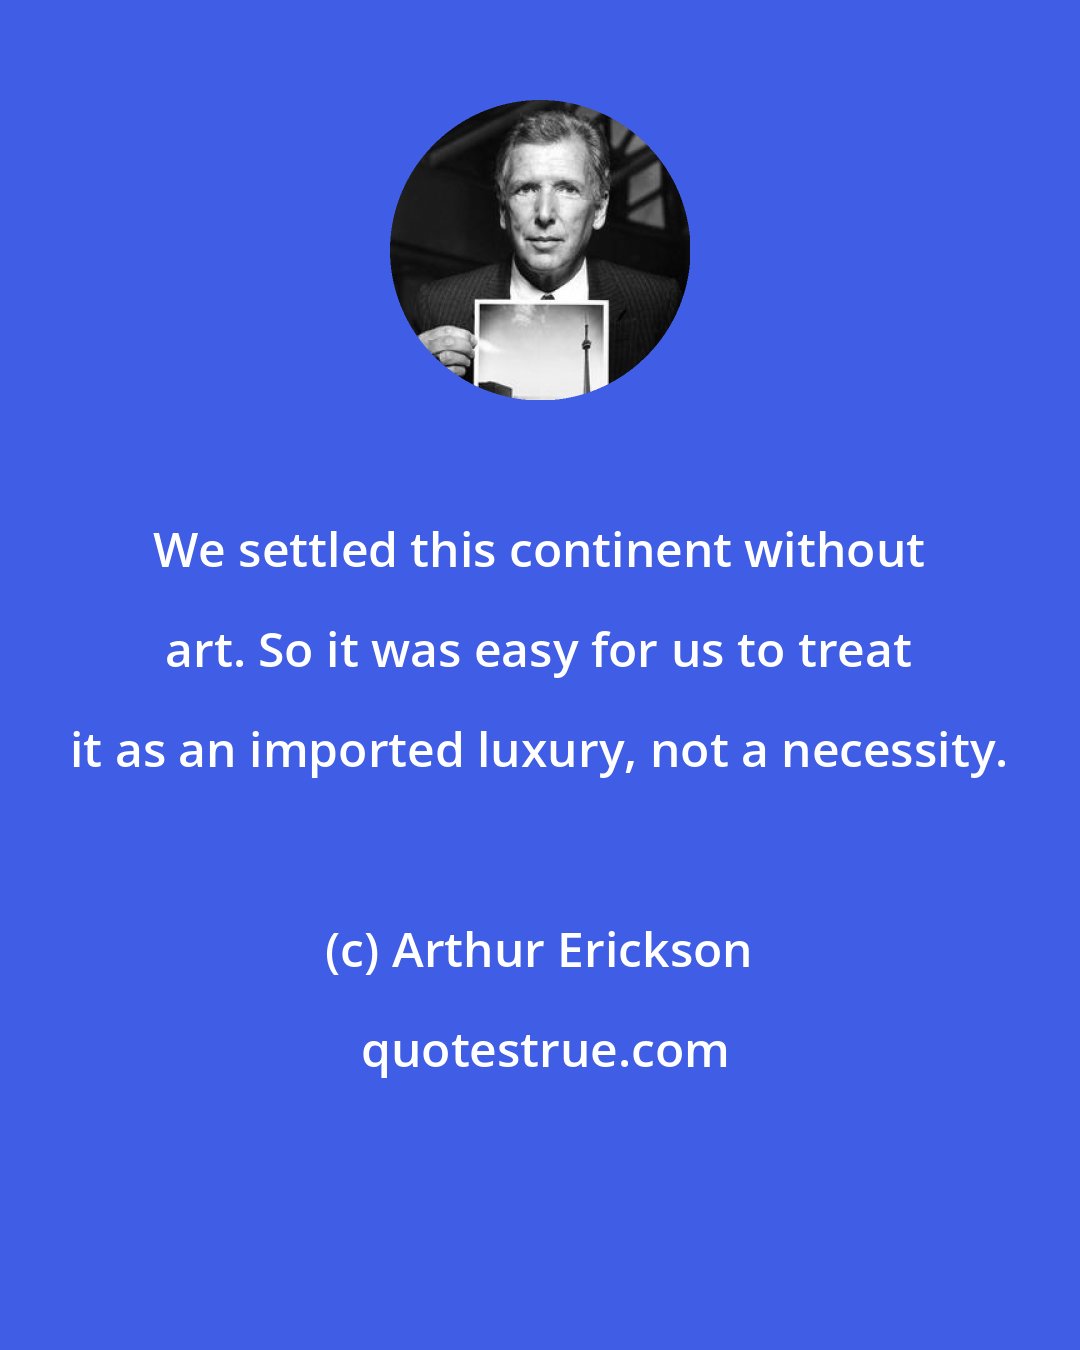 Arthur Erickson: We settled this continent without art. So it was easy for us to treat it as an imported luxury, not a necessity.